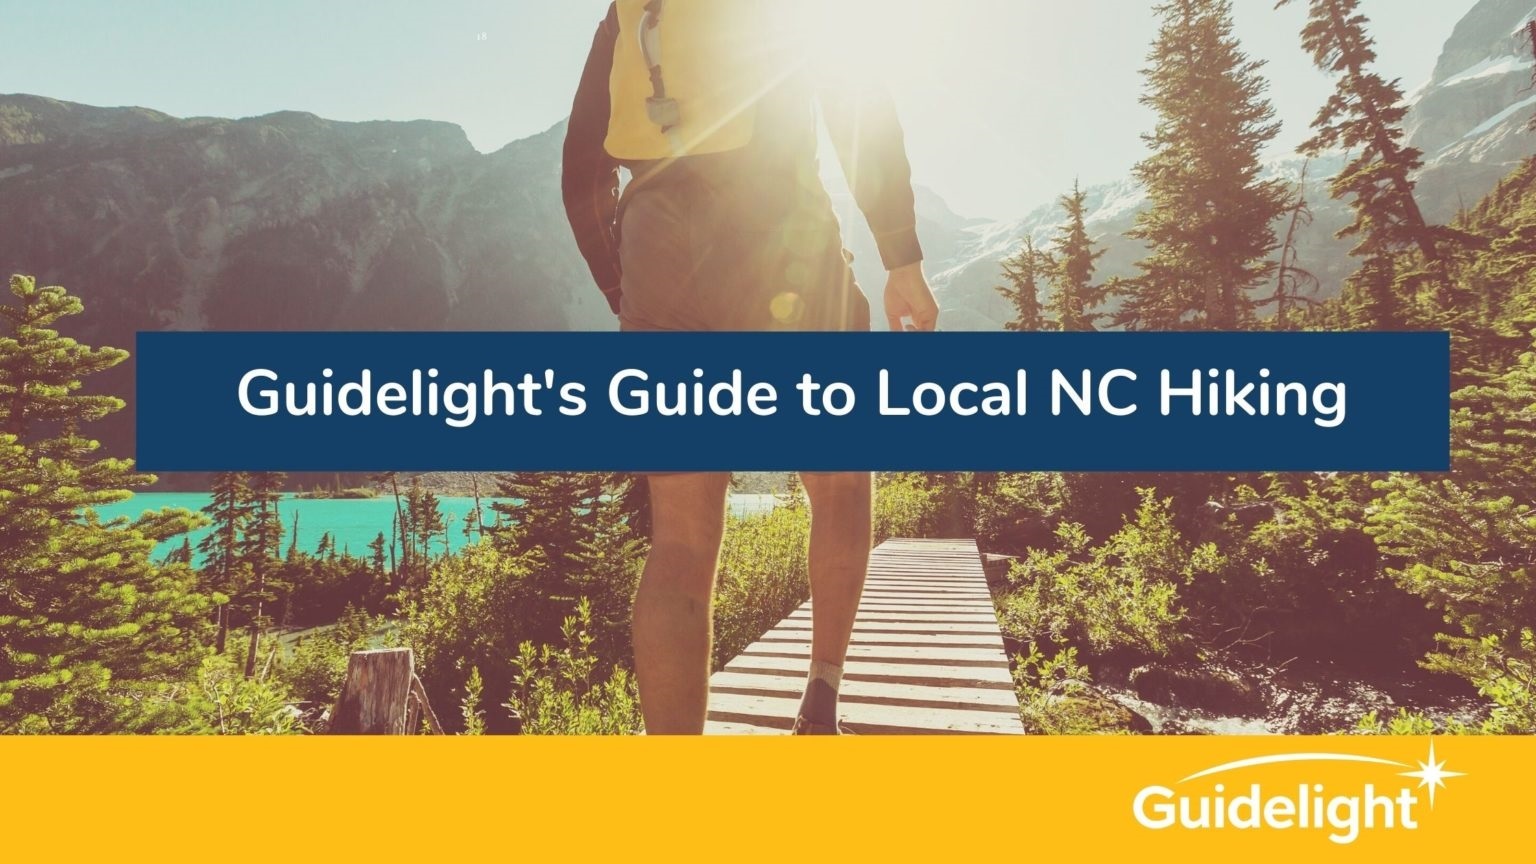 Guidelight’s Guide to Local NC Hiking.jpg  by Guidelight